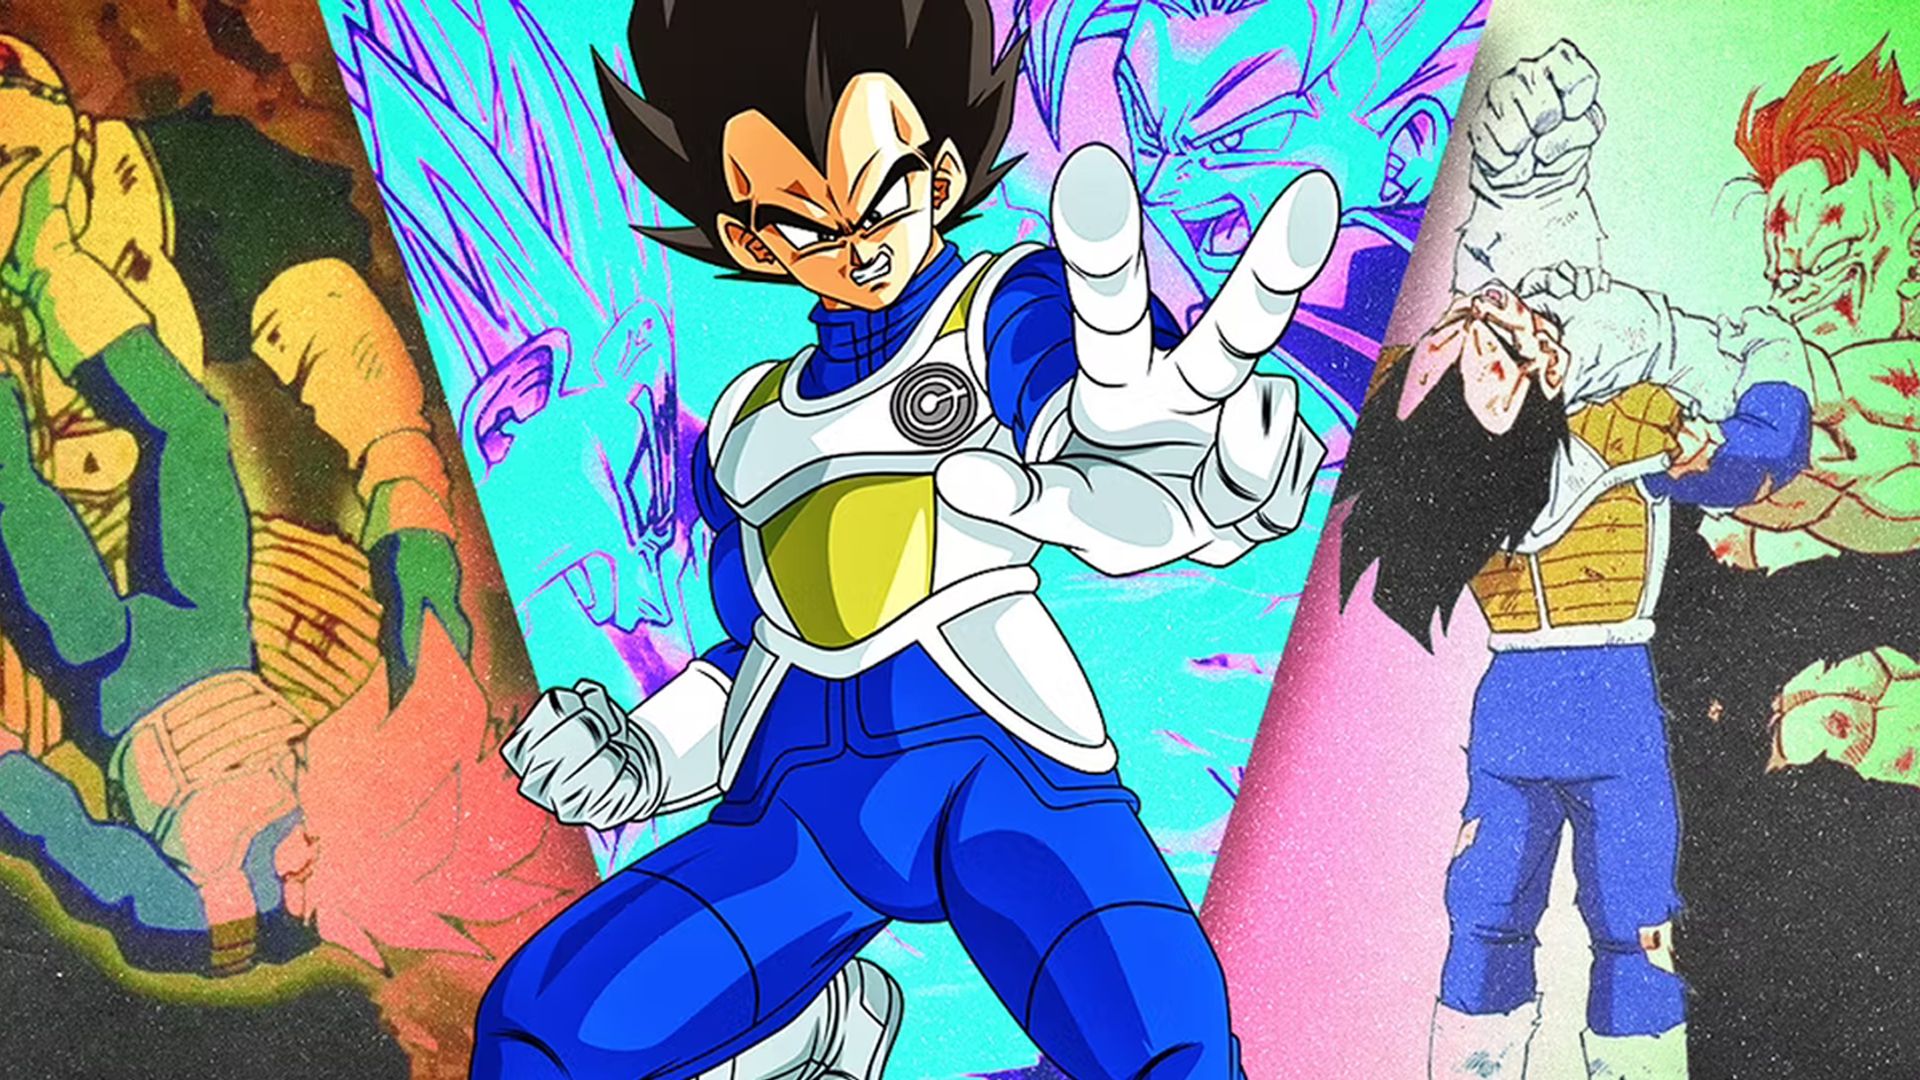 Most Powerful Vegeta's Forms In Dragon Ball, Ranked